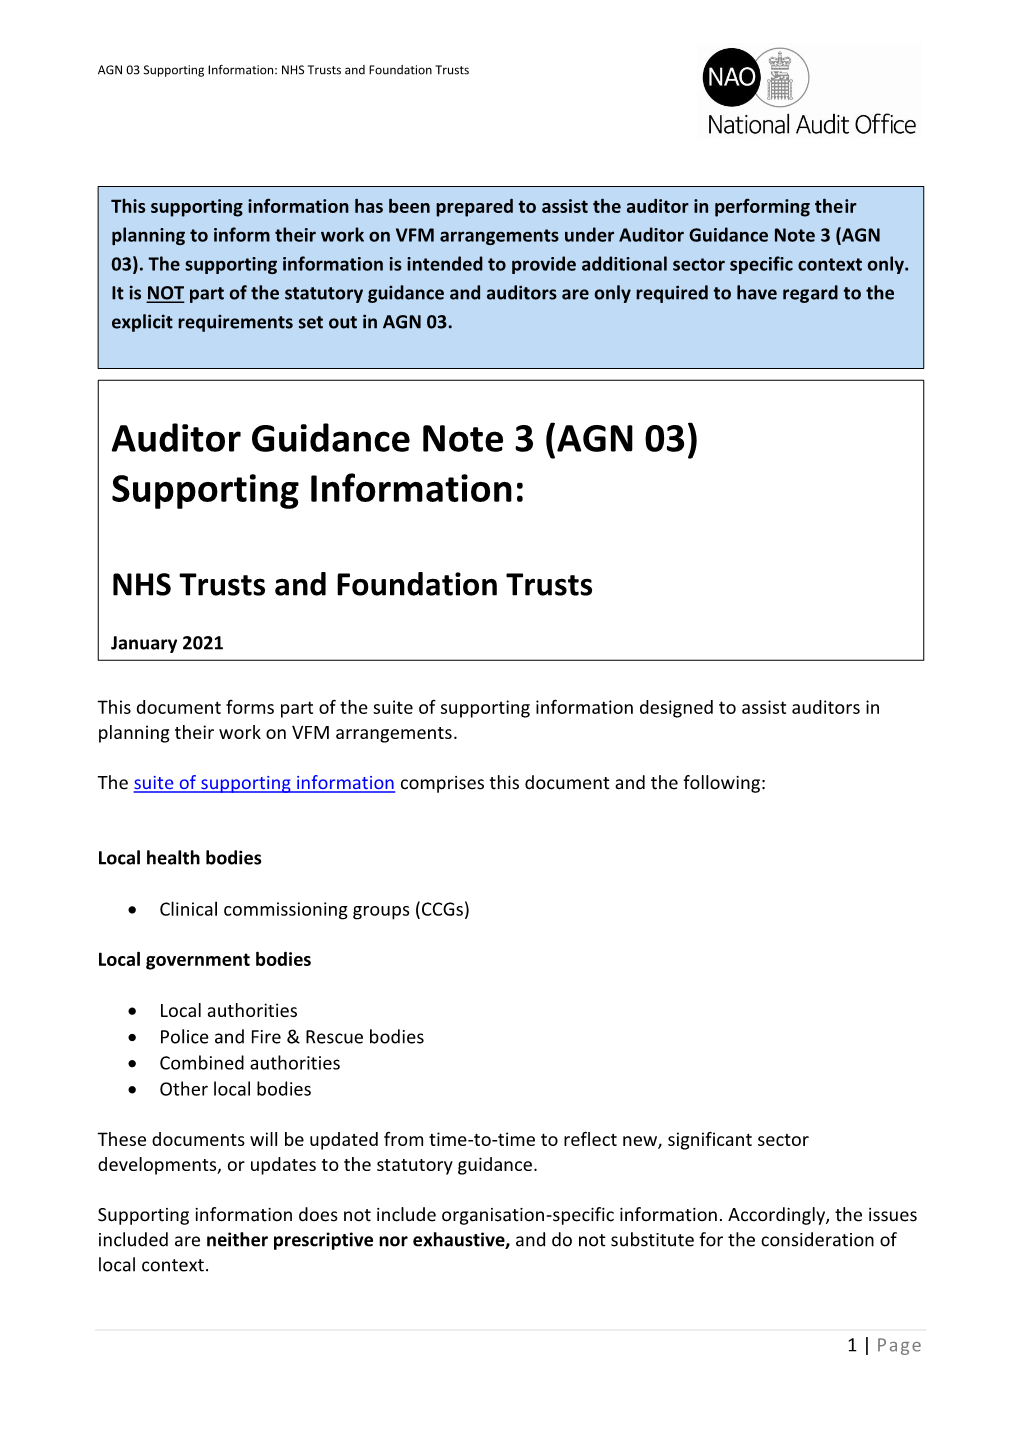 Auditor Guidance Note 3 (AGN 03) Supporting Information